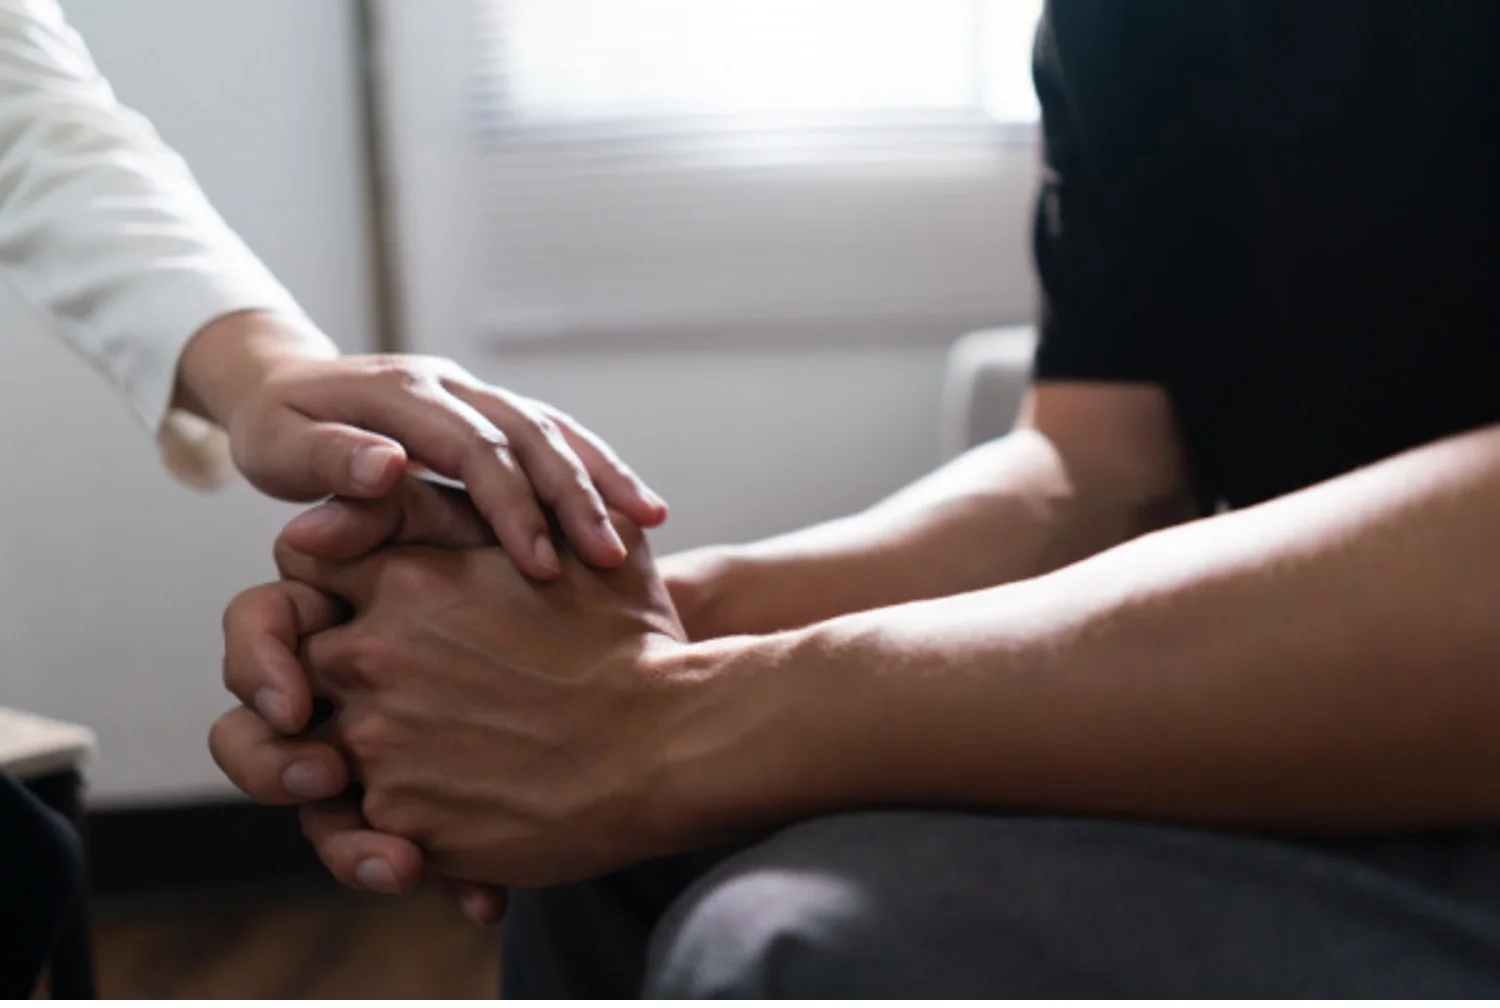 Therapist puts a comforting hand on the hands of a mental health patient